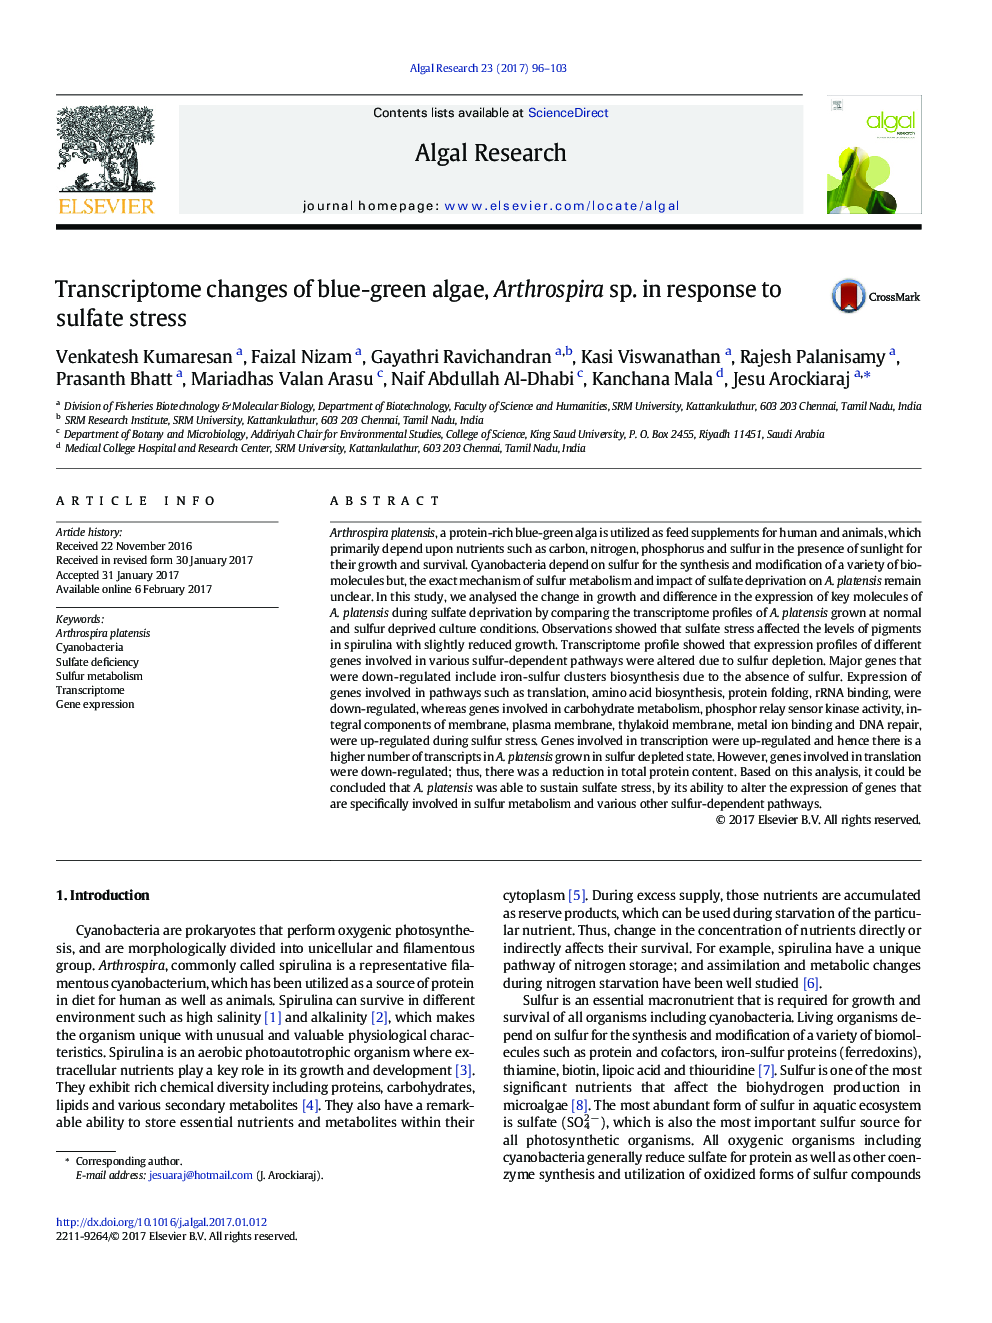 Transcriptome changes of blue-green algae, Arthrospira sp. in response to sulfate stress